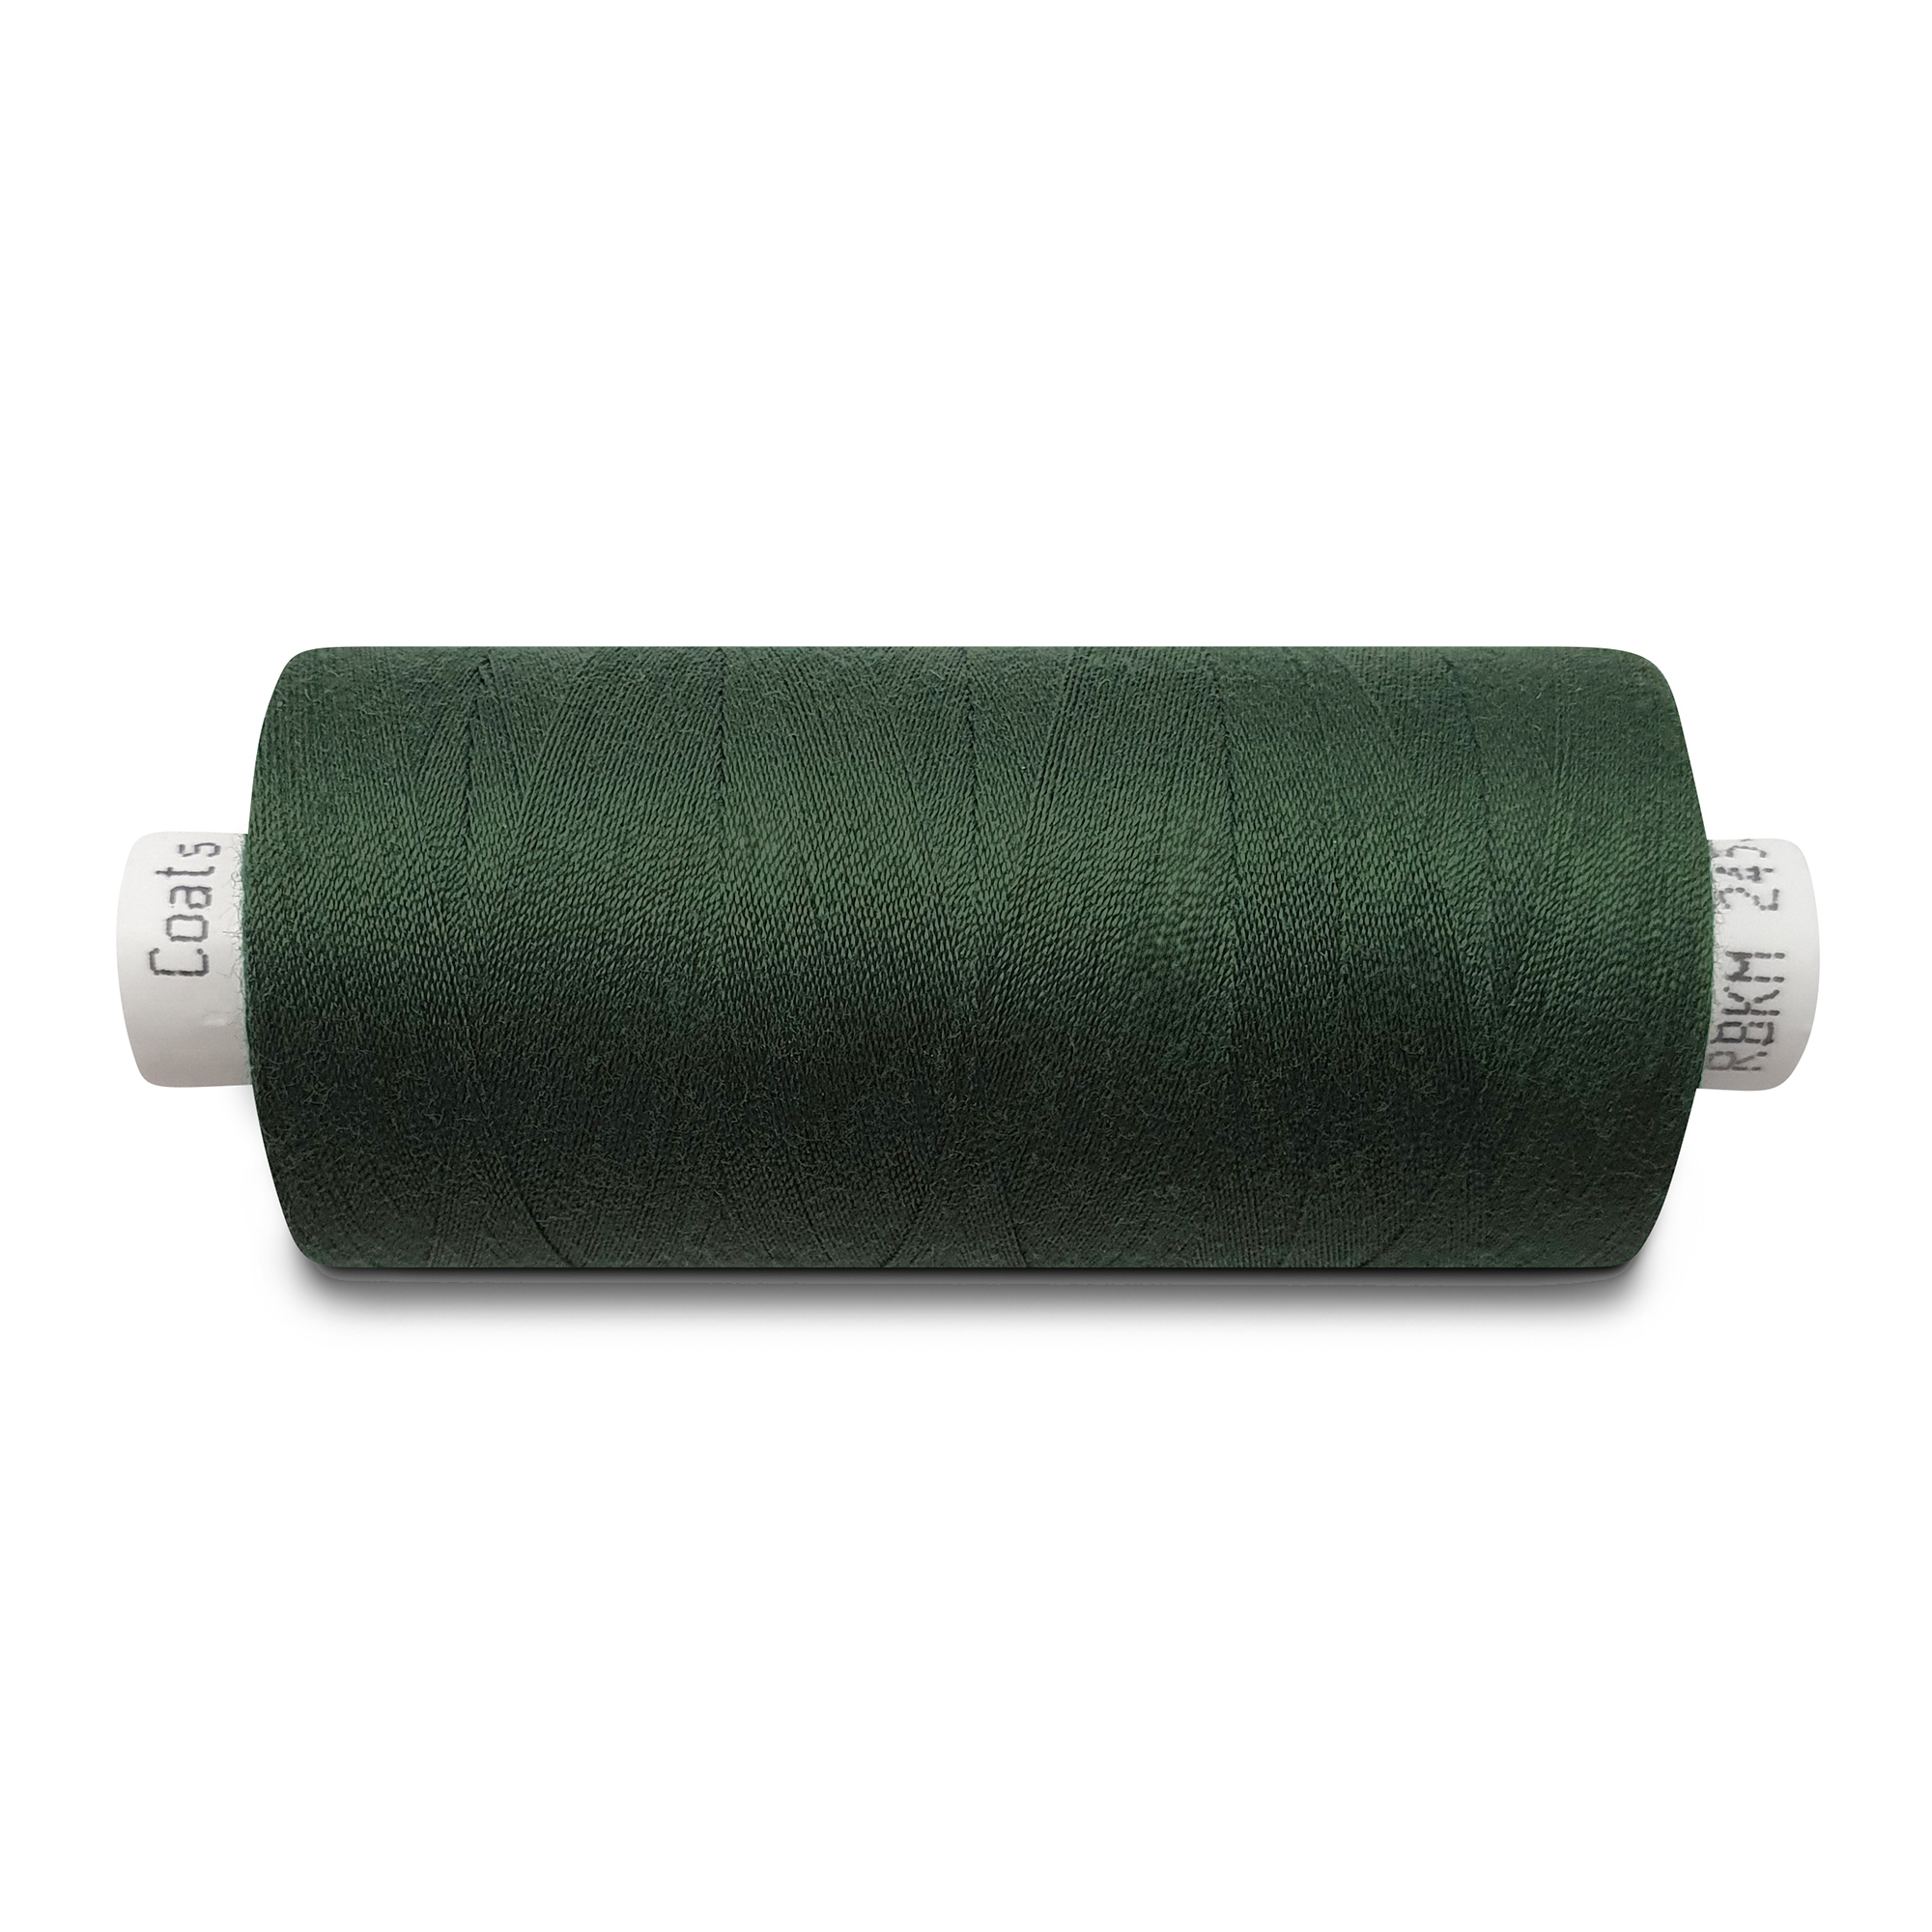 Leather/Sewing thread moss green